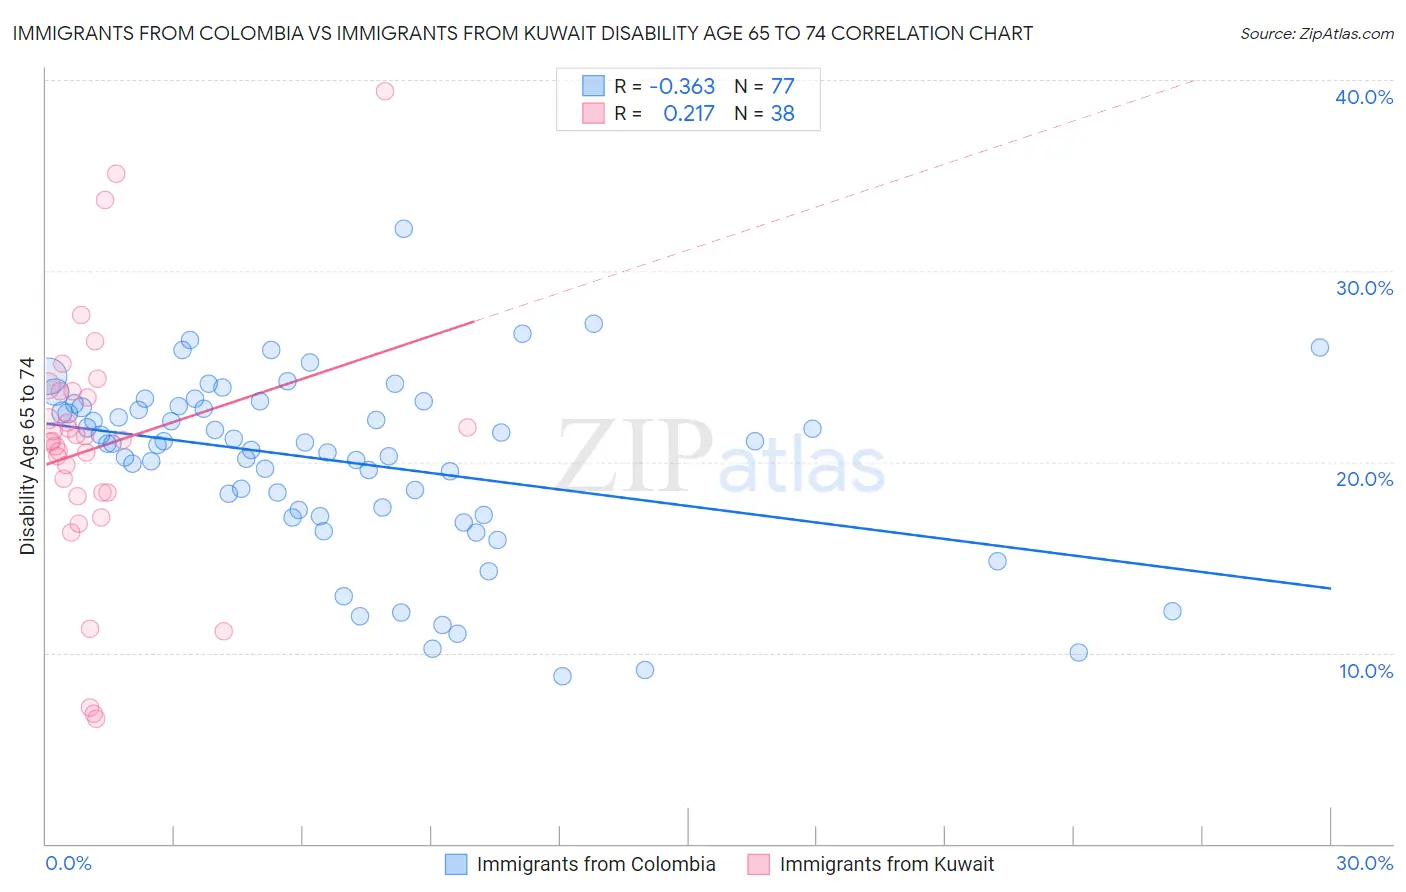 Immigrants from Colombia vs Immigrants from Kuwait Disability Age 65 to 74